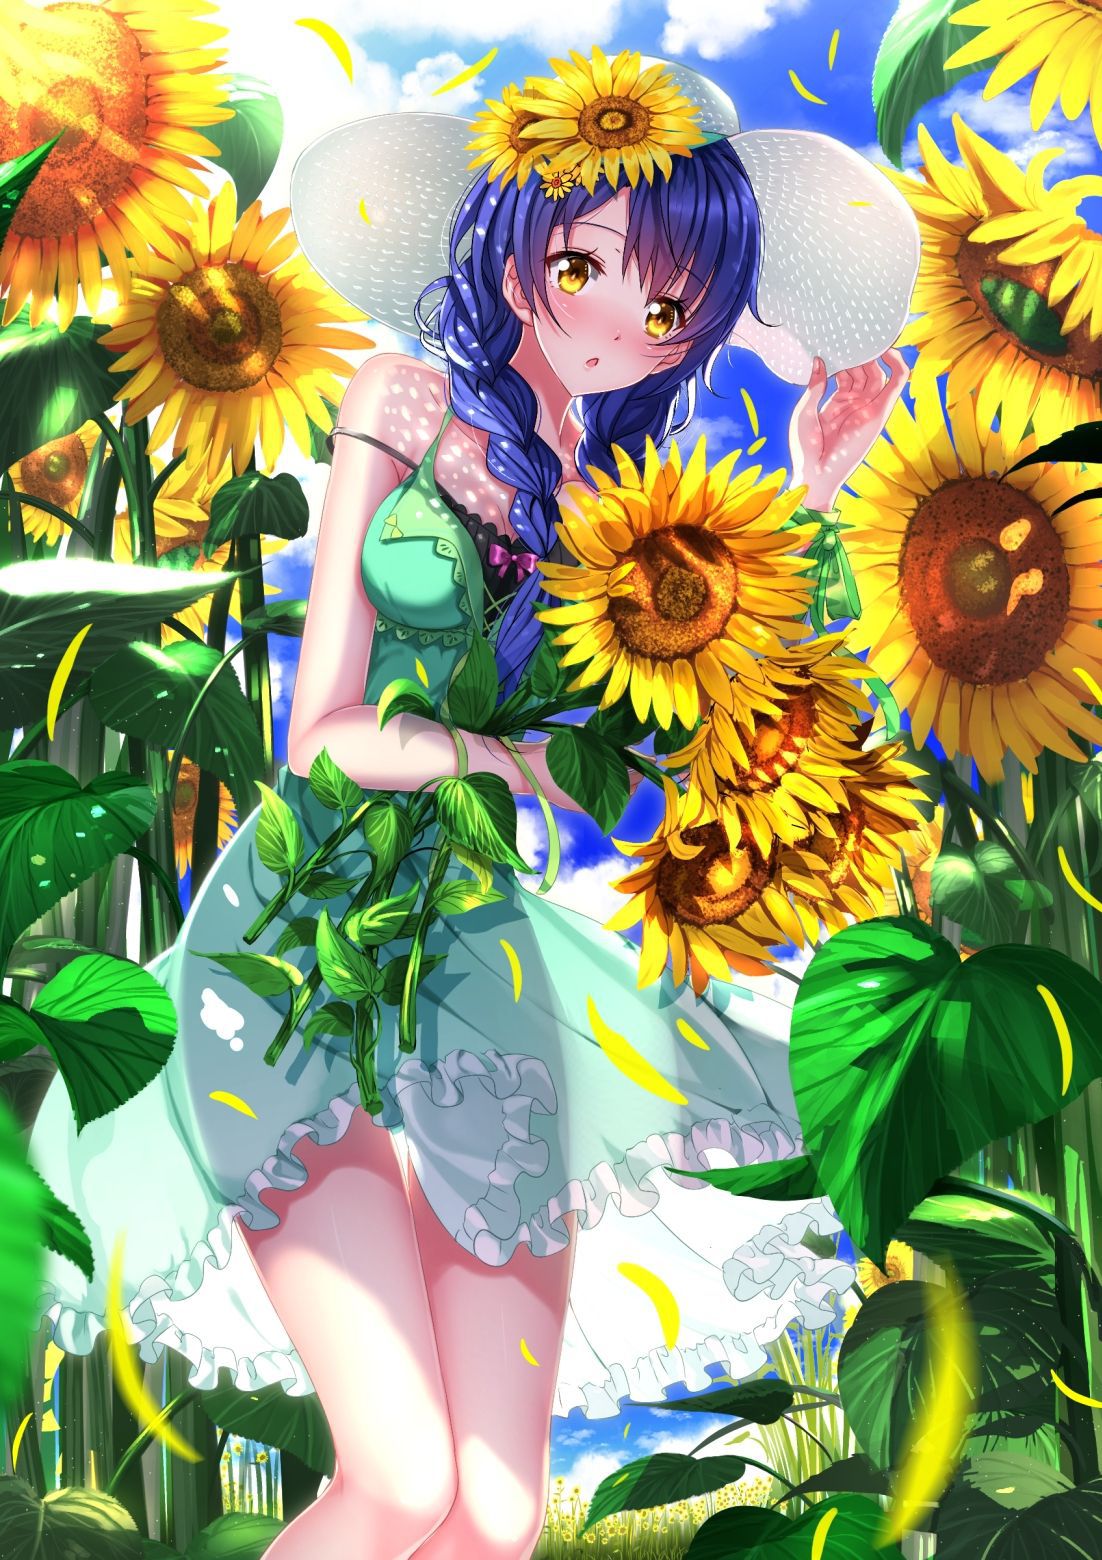 [Secondary, ZIP] summer 2: girl with a sunflower or image summary 13